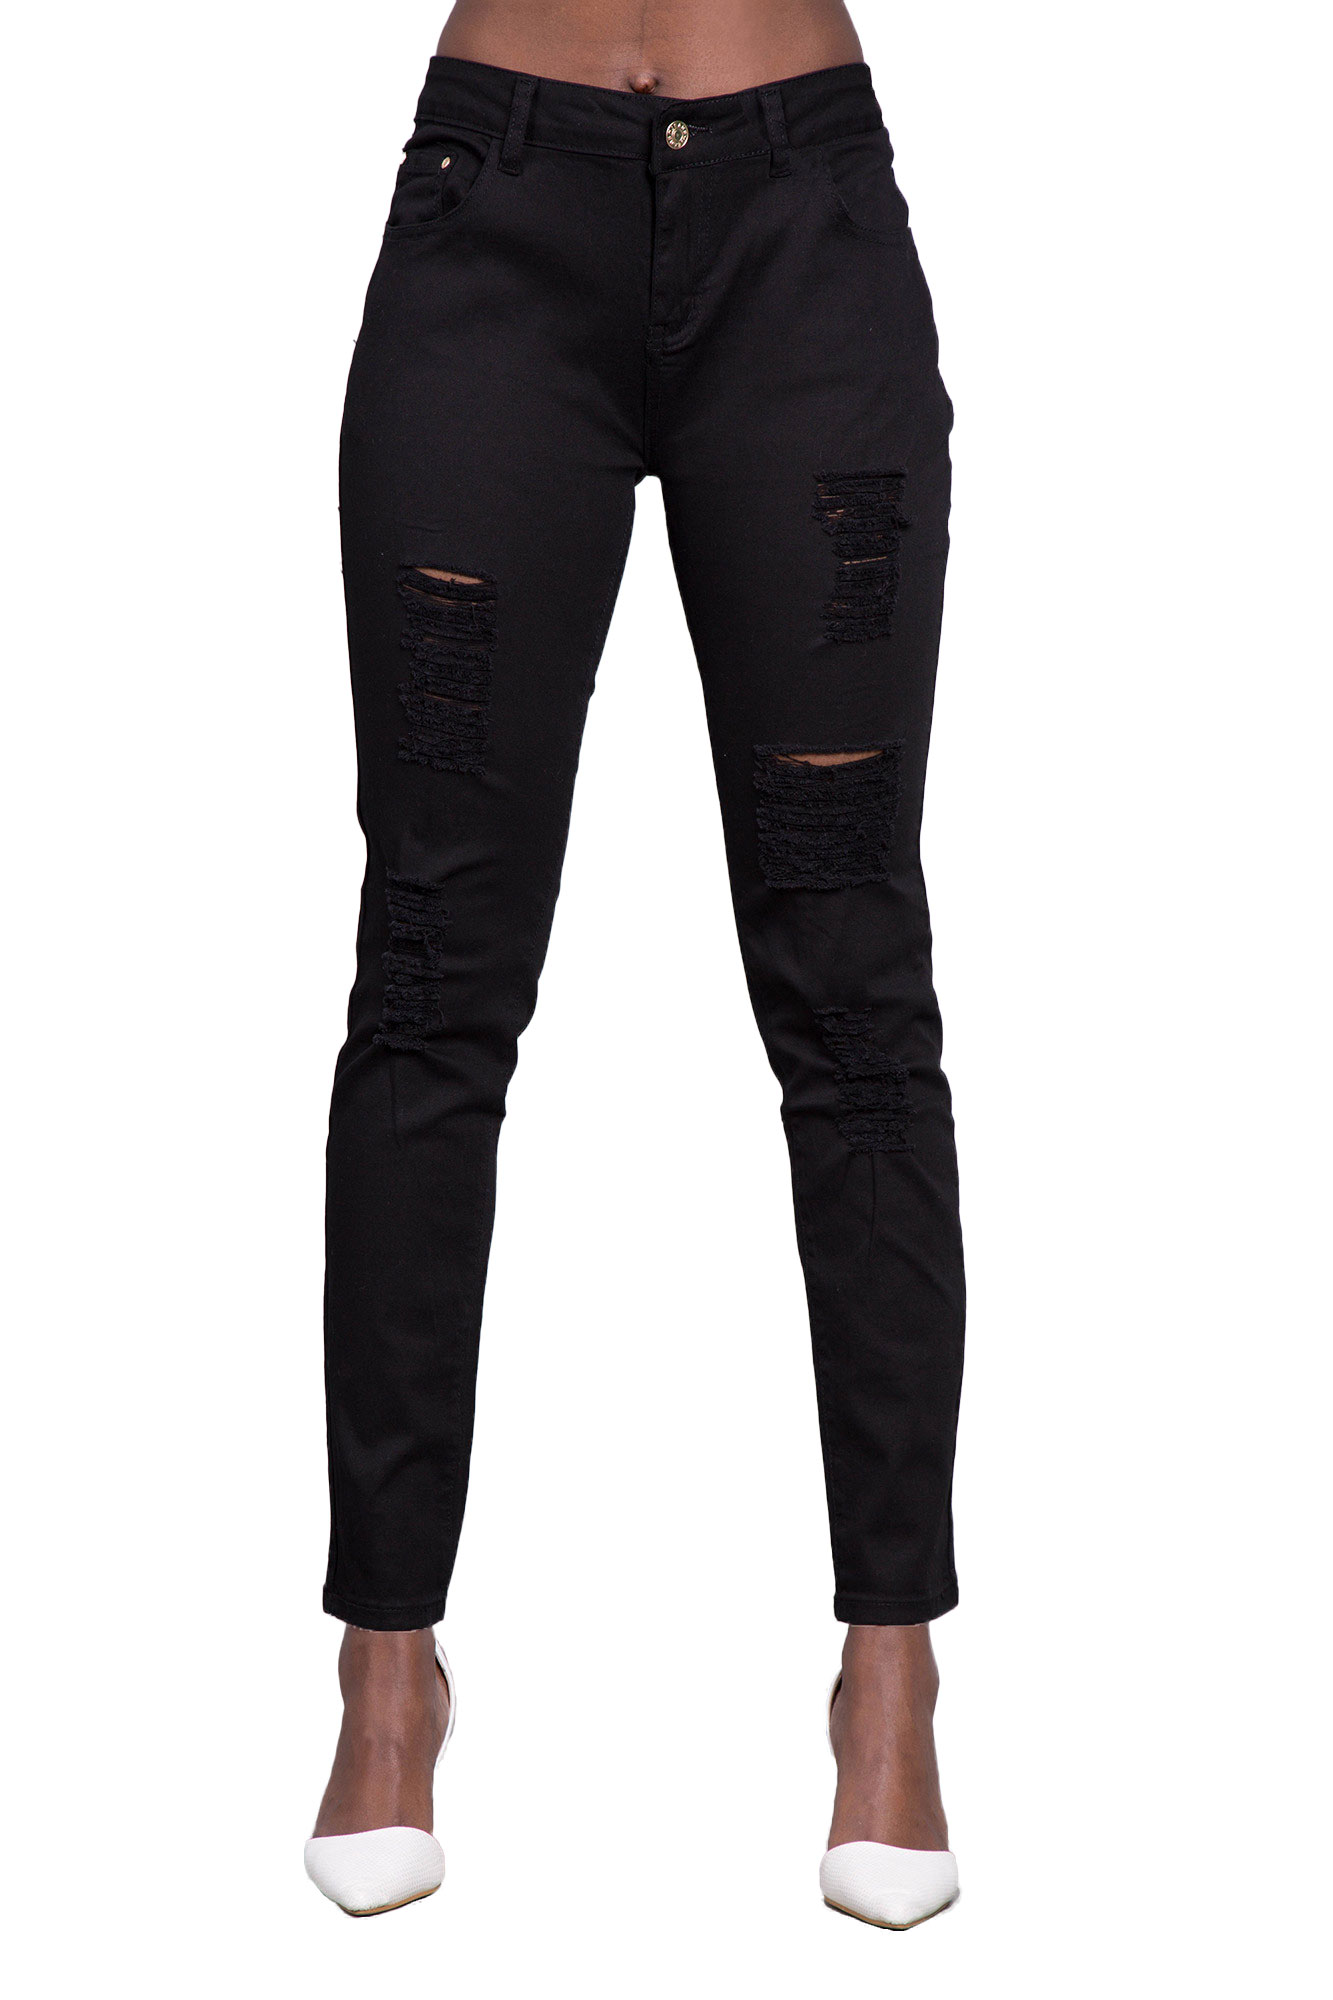 Womens Ladies Black High Waist Plus Size Ripped Stretchy Jeans UK 14 16 ...